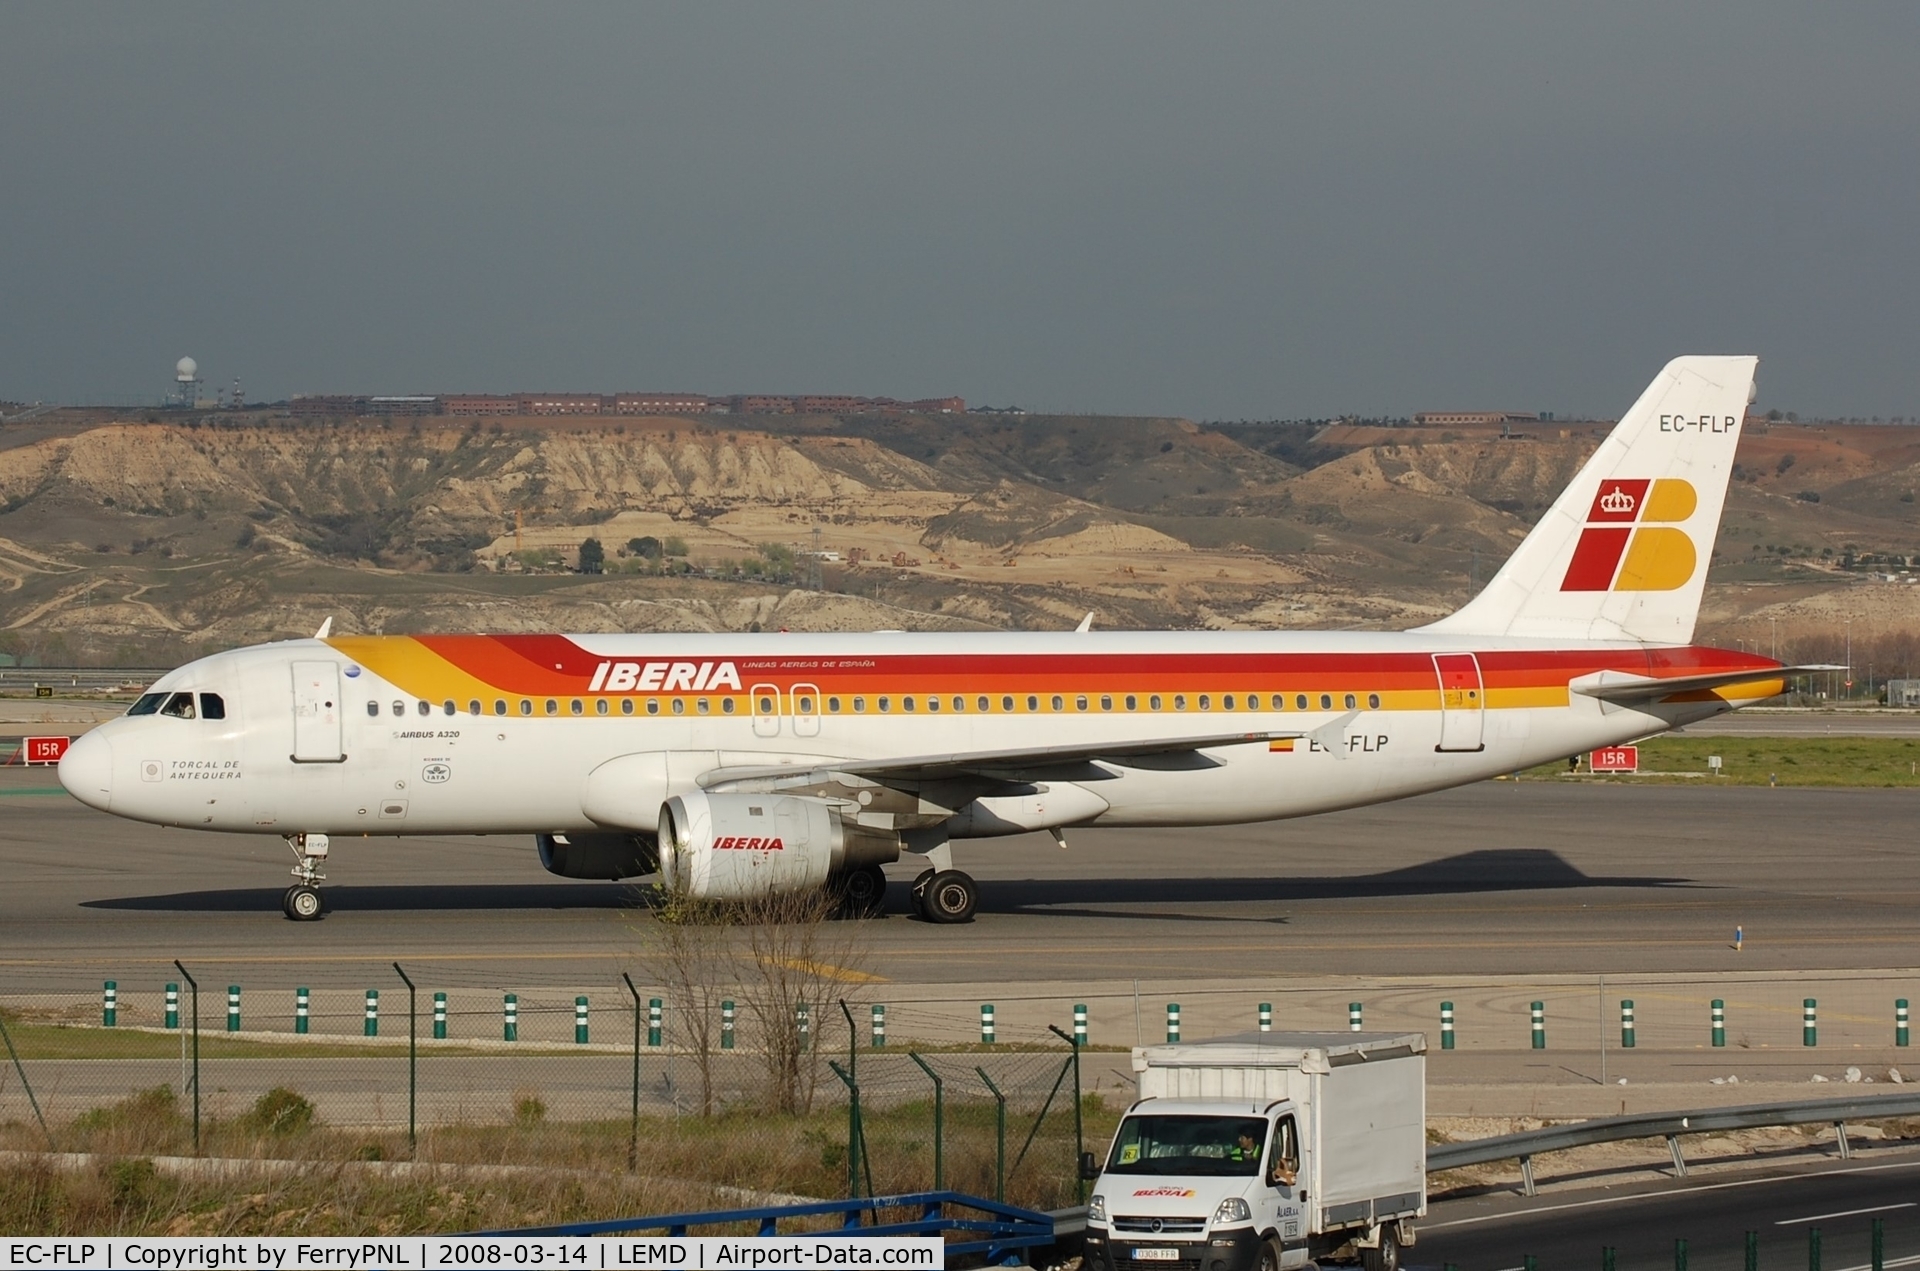 EC-FLP, 1991 Airbus A320-211 C/N 266, Iberia A320 stored at MAD since 2013